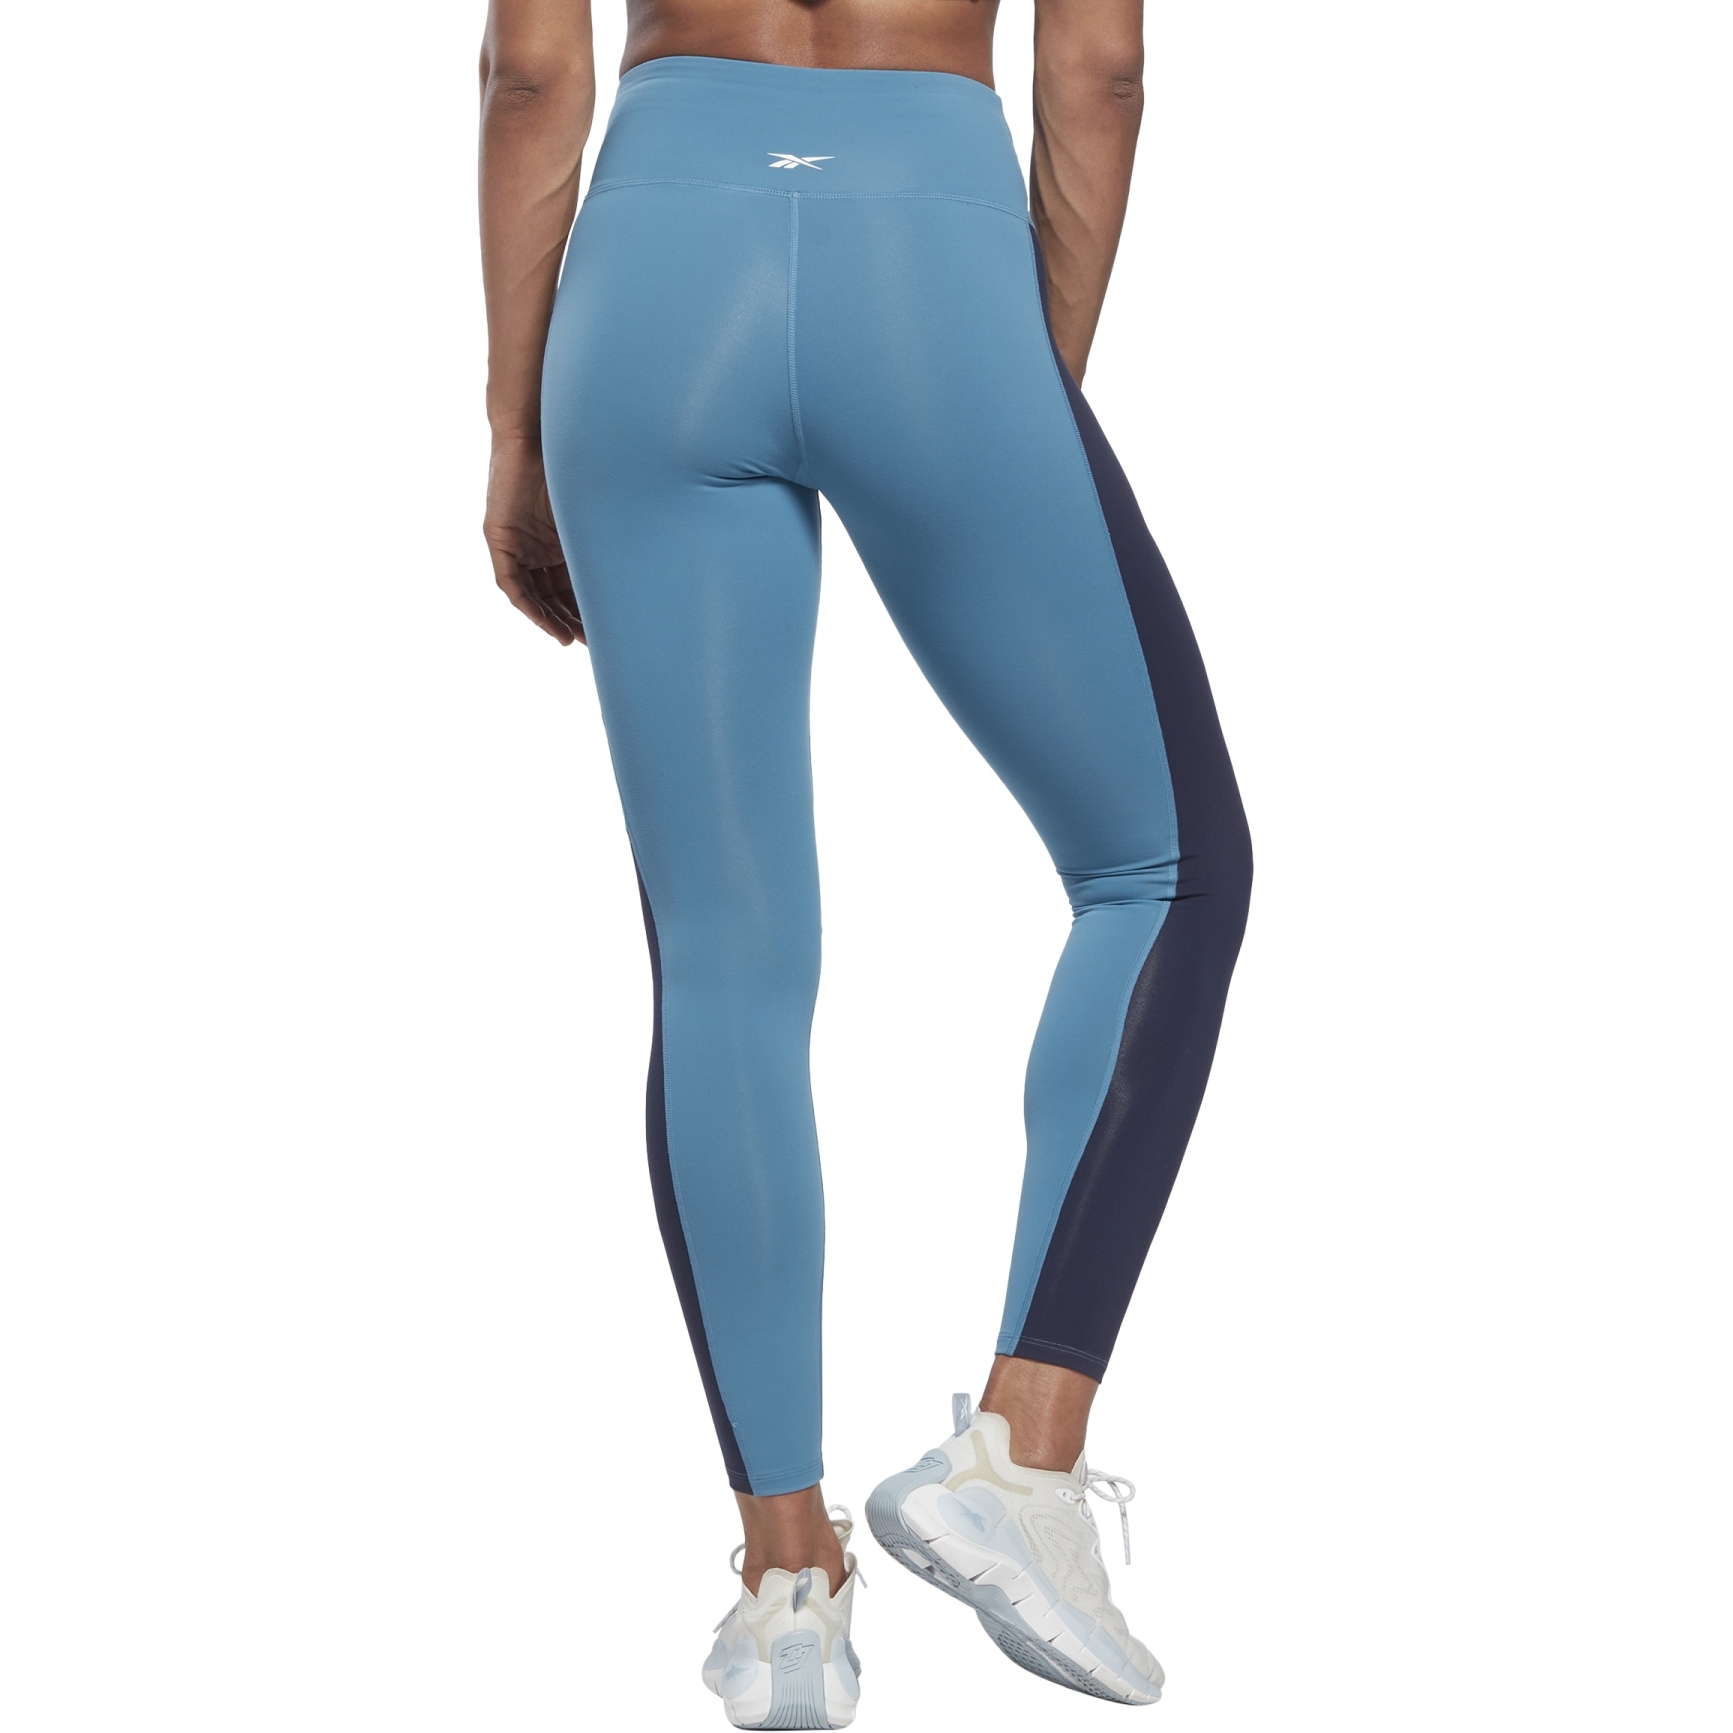 Reebok Lux High Rise Colorblock Tights Women's - steely blue